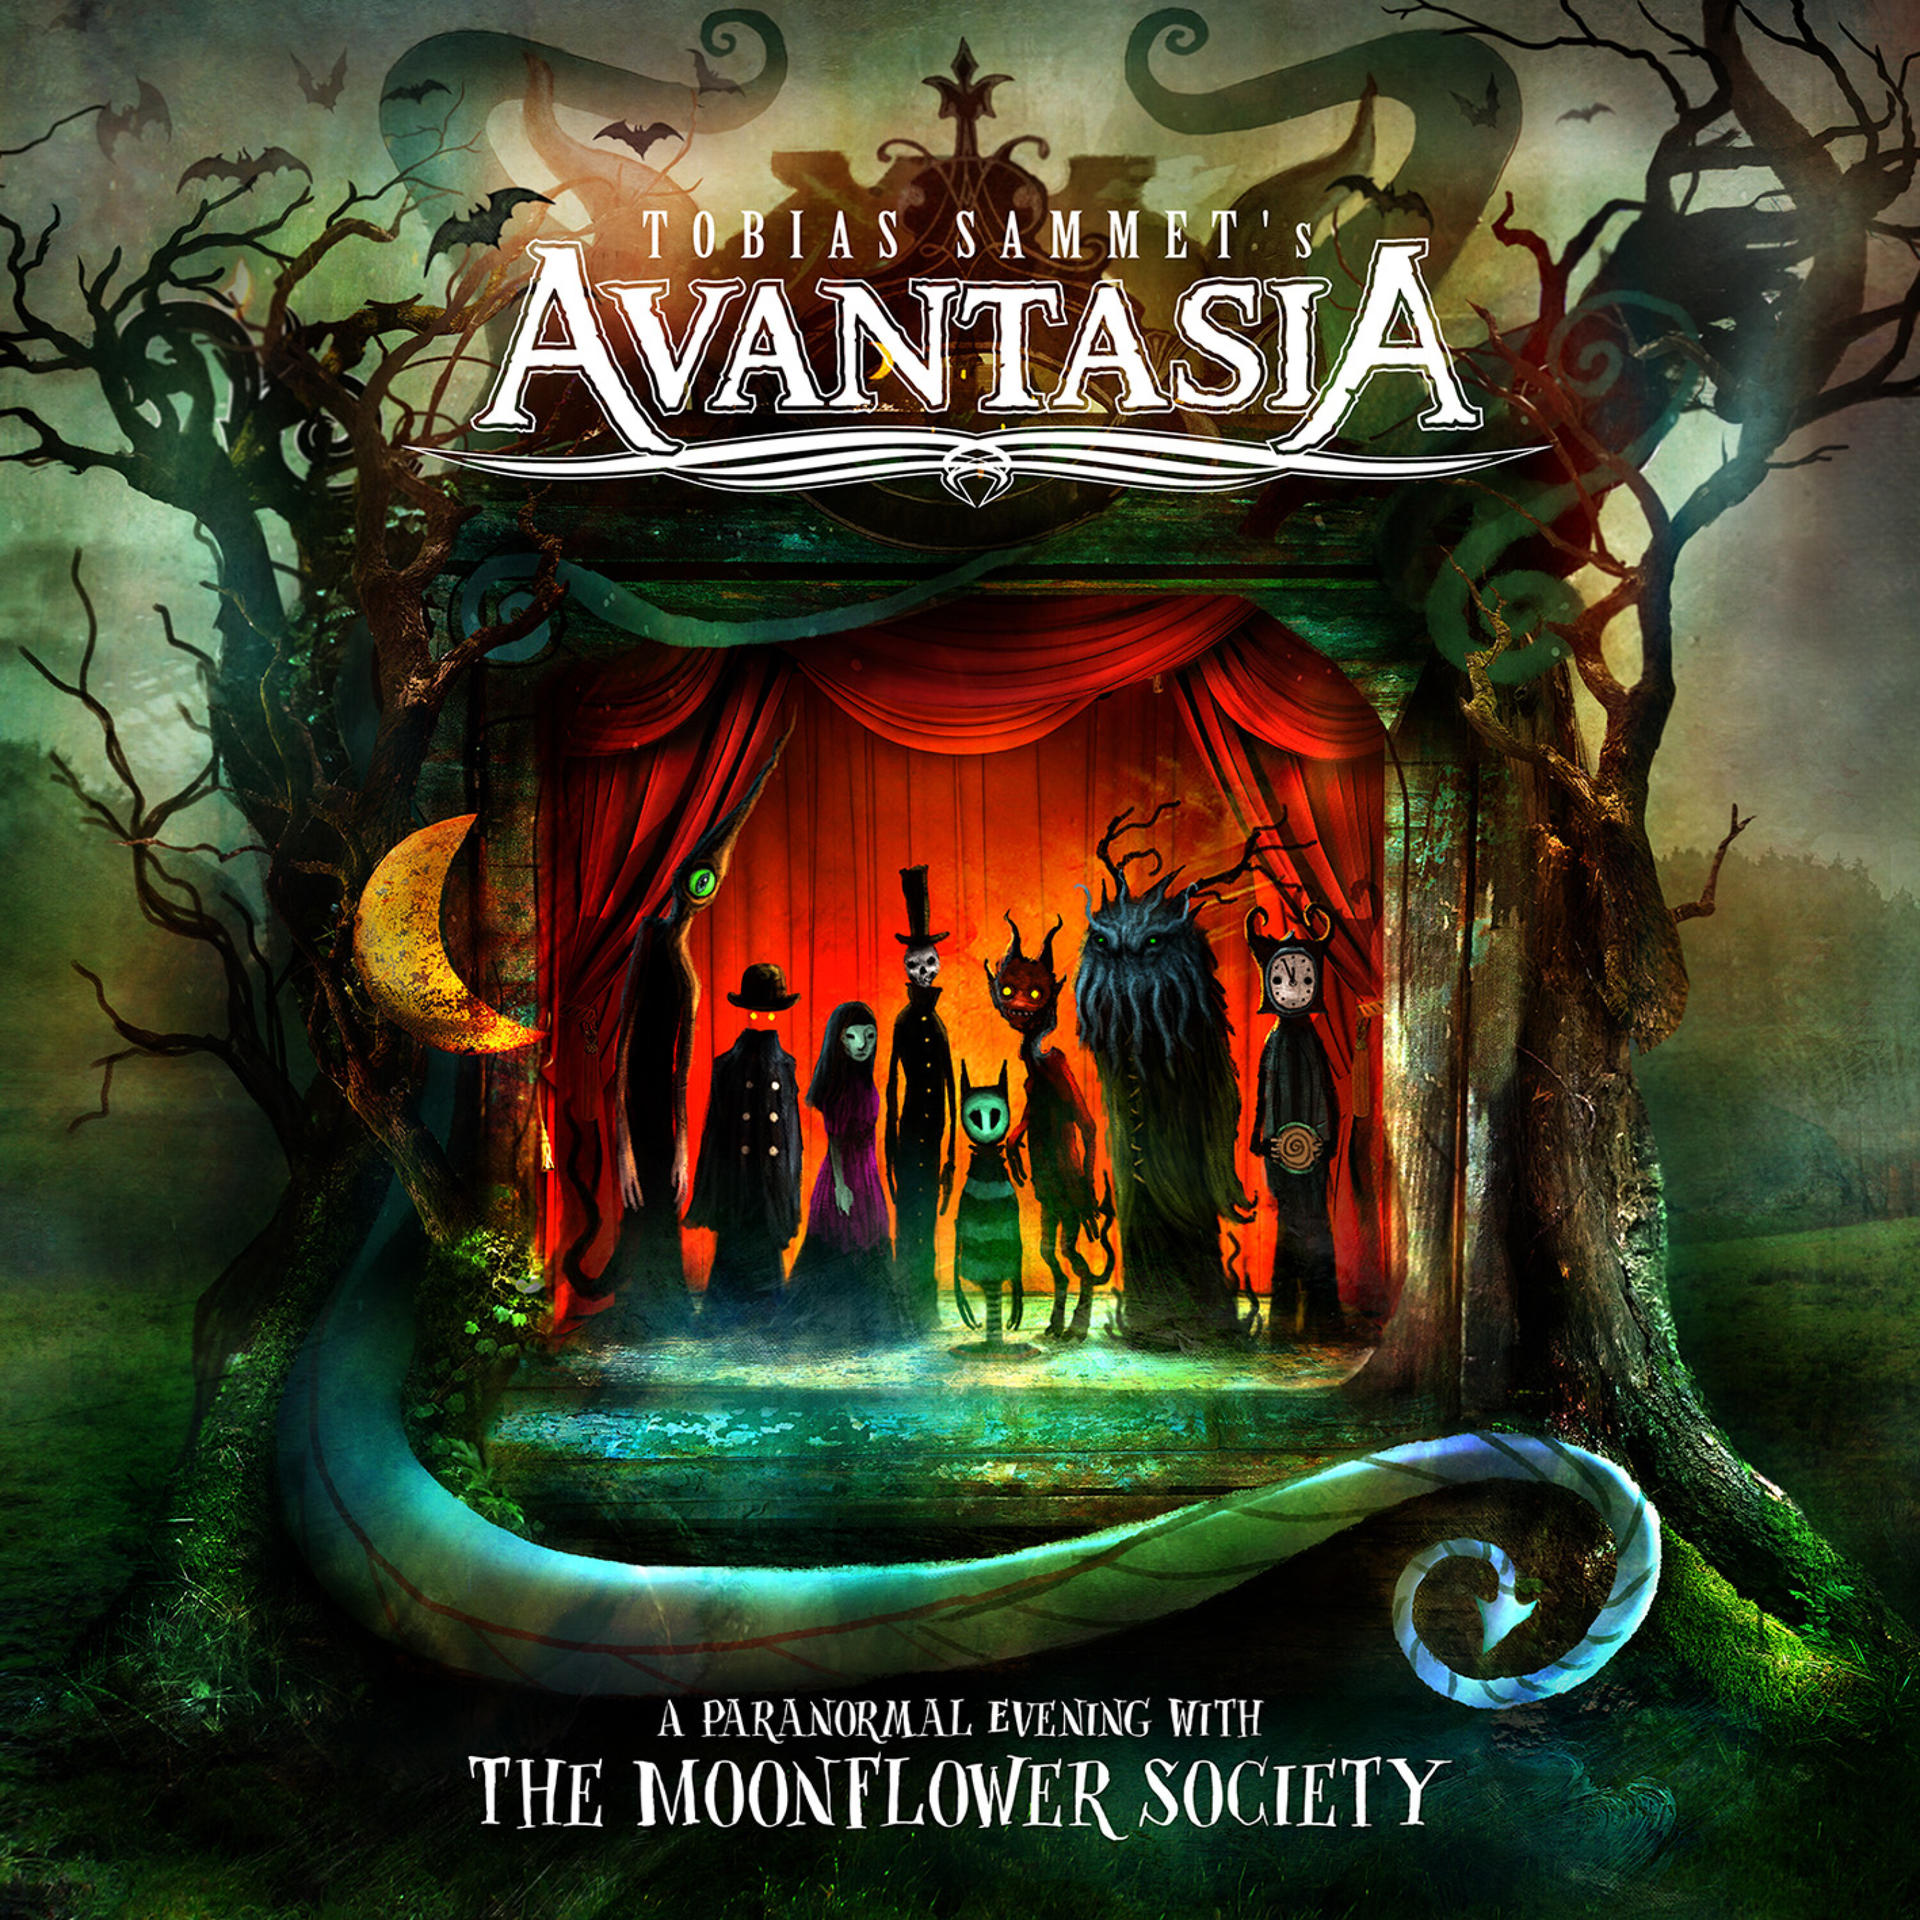 With Paranormal Moonflower The - - Society 2LP Evening (Vinyl) PIC Avantasia A